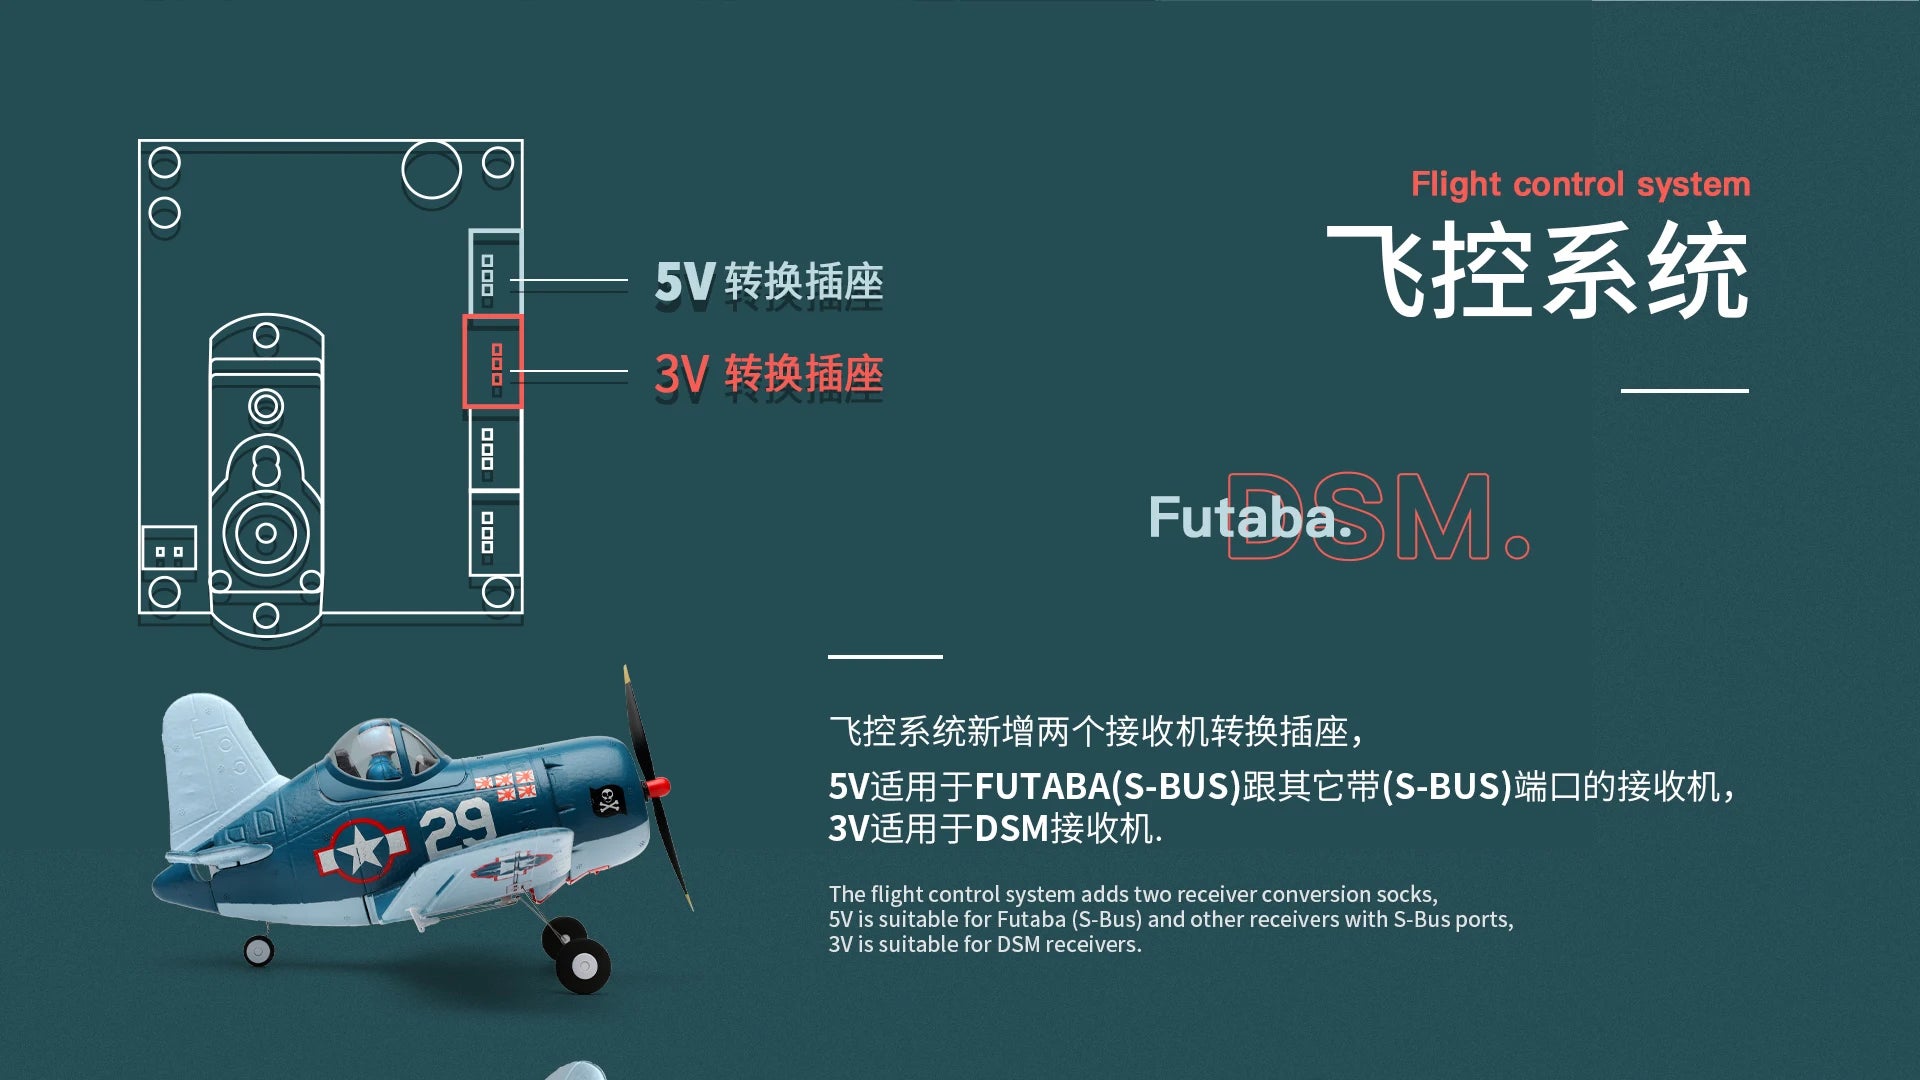 WLtoys XK A500  A250 RC Plane, SV is suitable for Futaba (S-Bus) and other receivers with